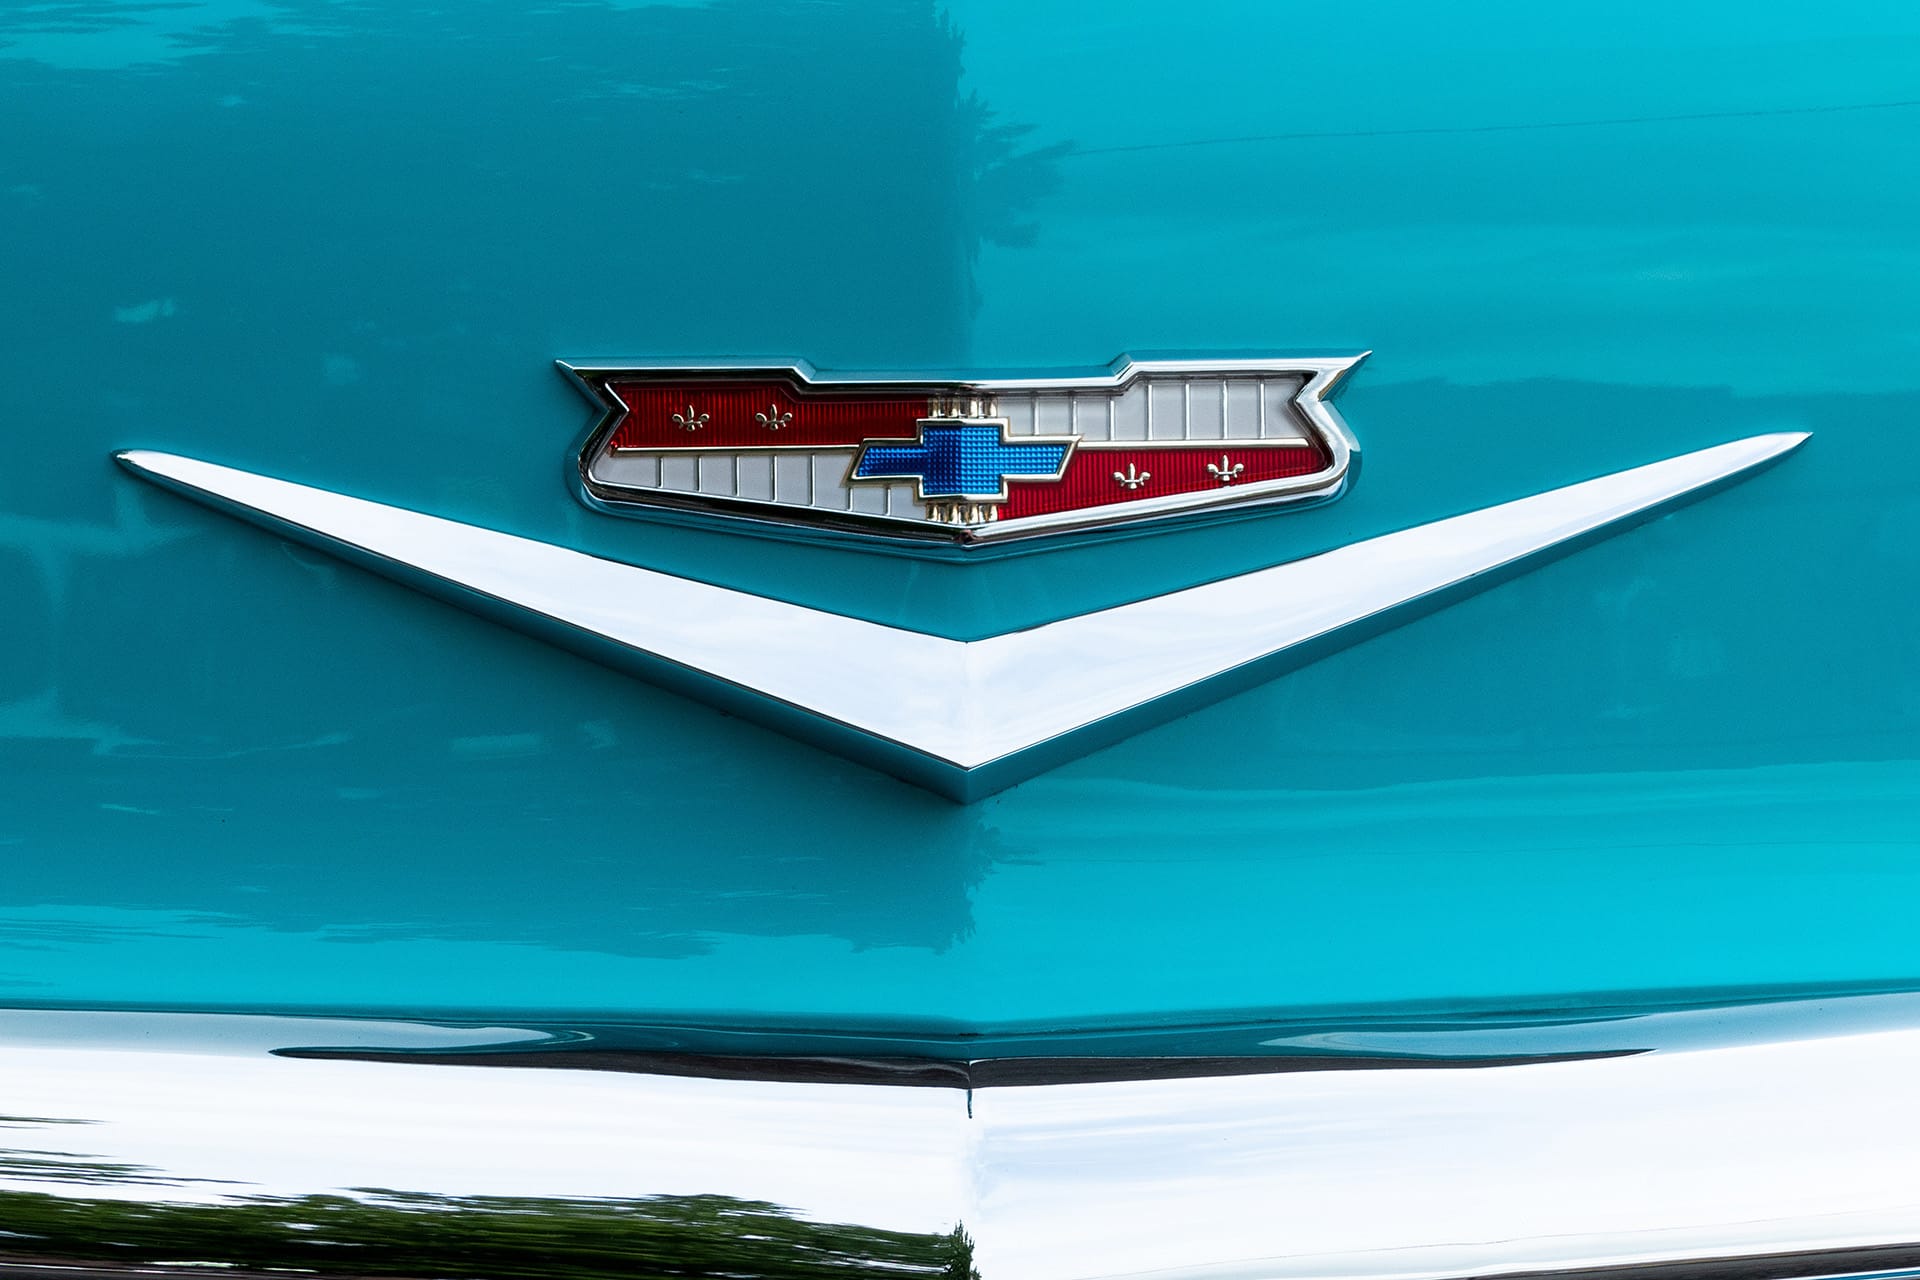 Chevrolet Classic Cars for Sale – A Comprehensive Guide